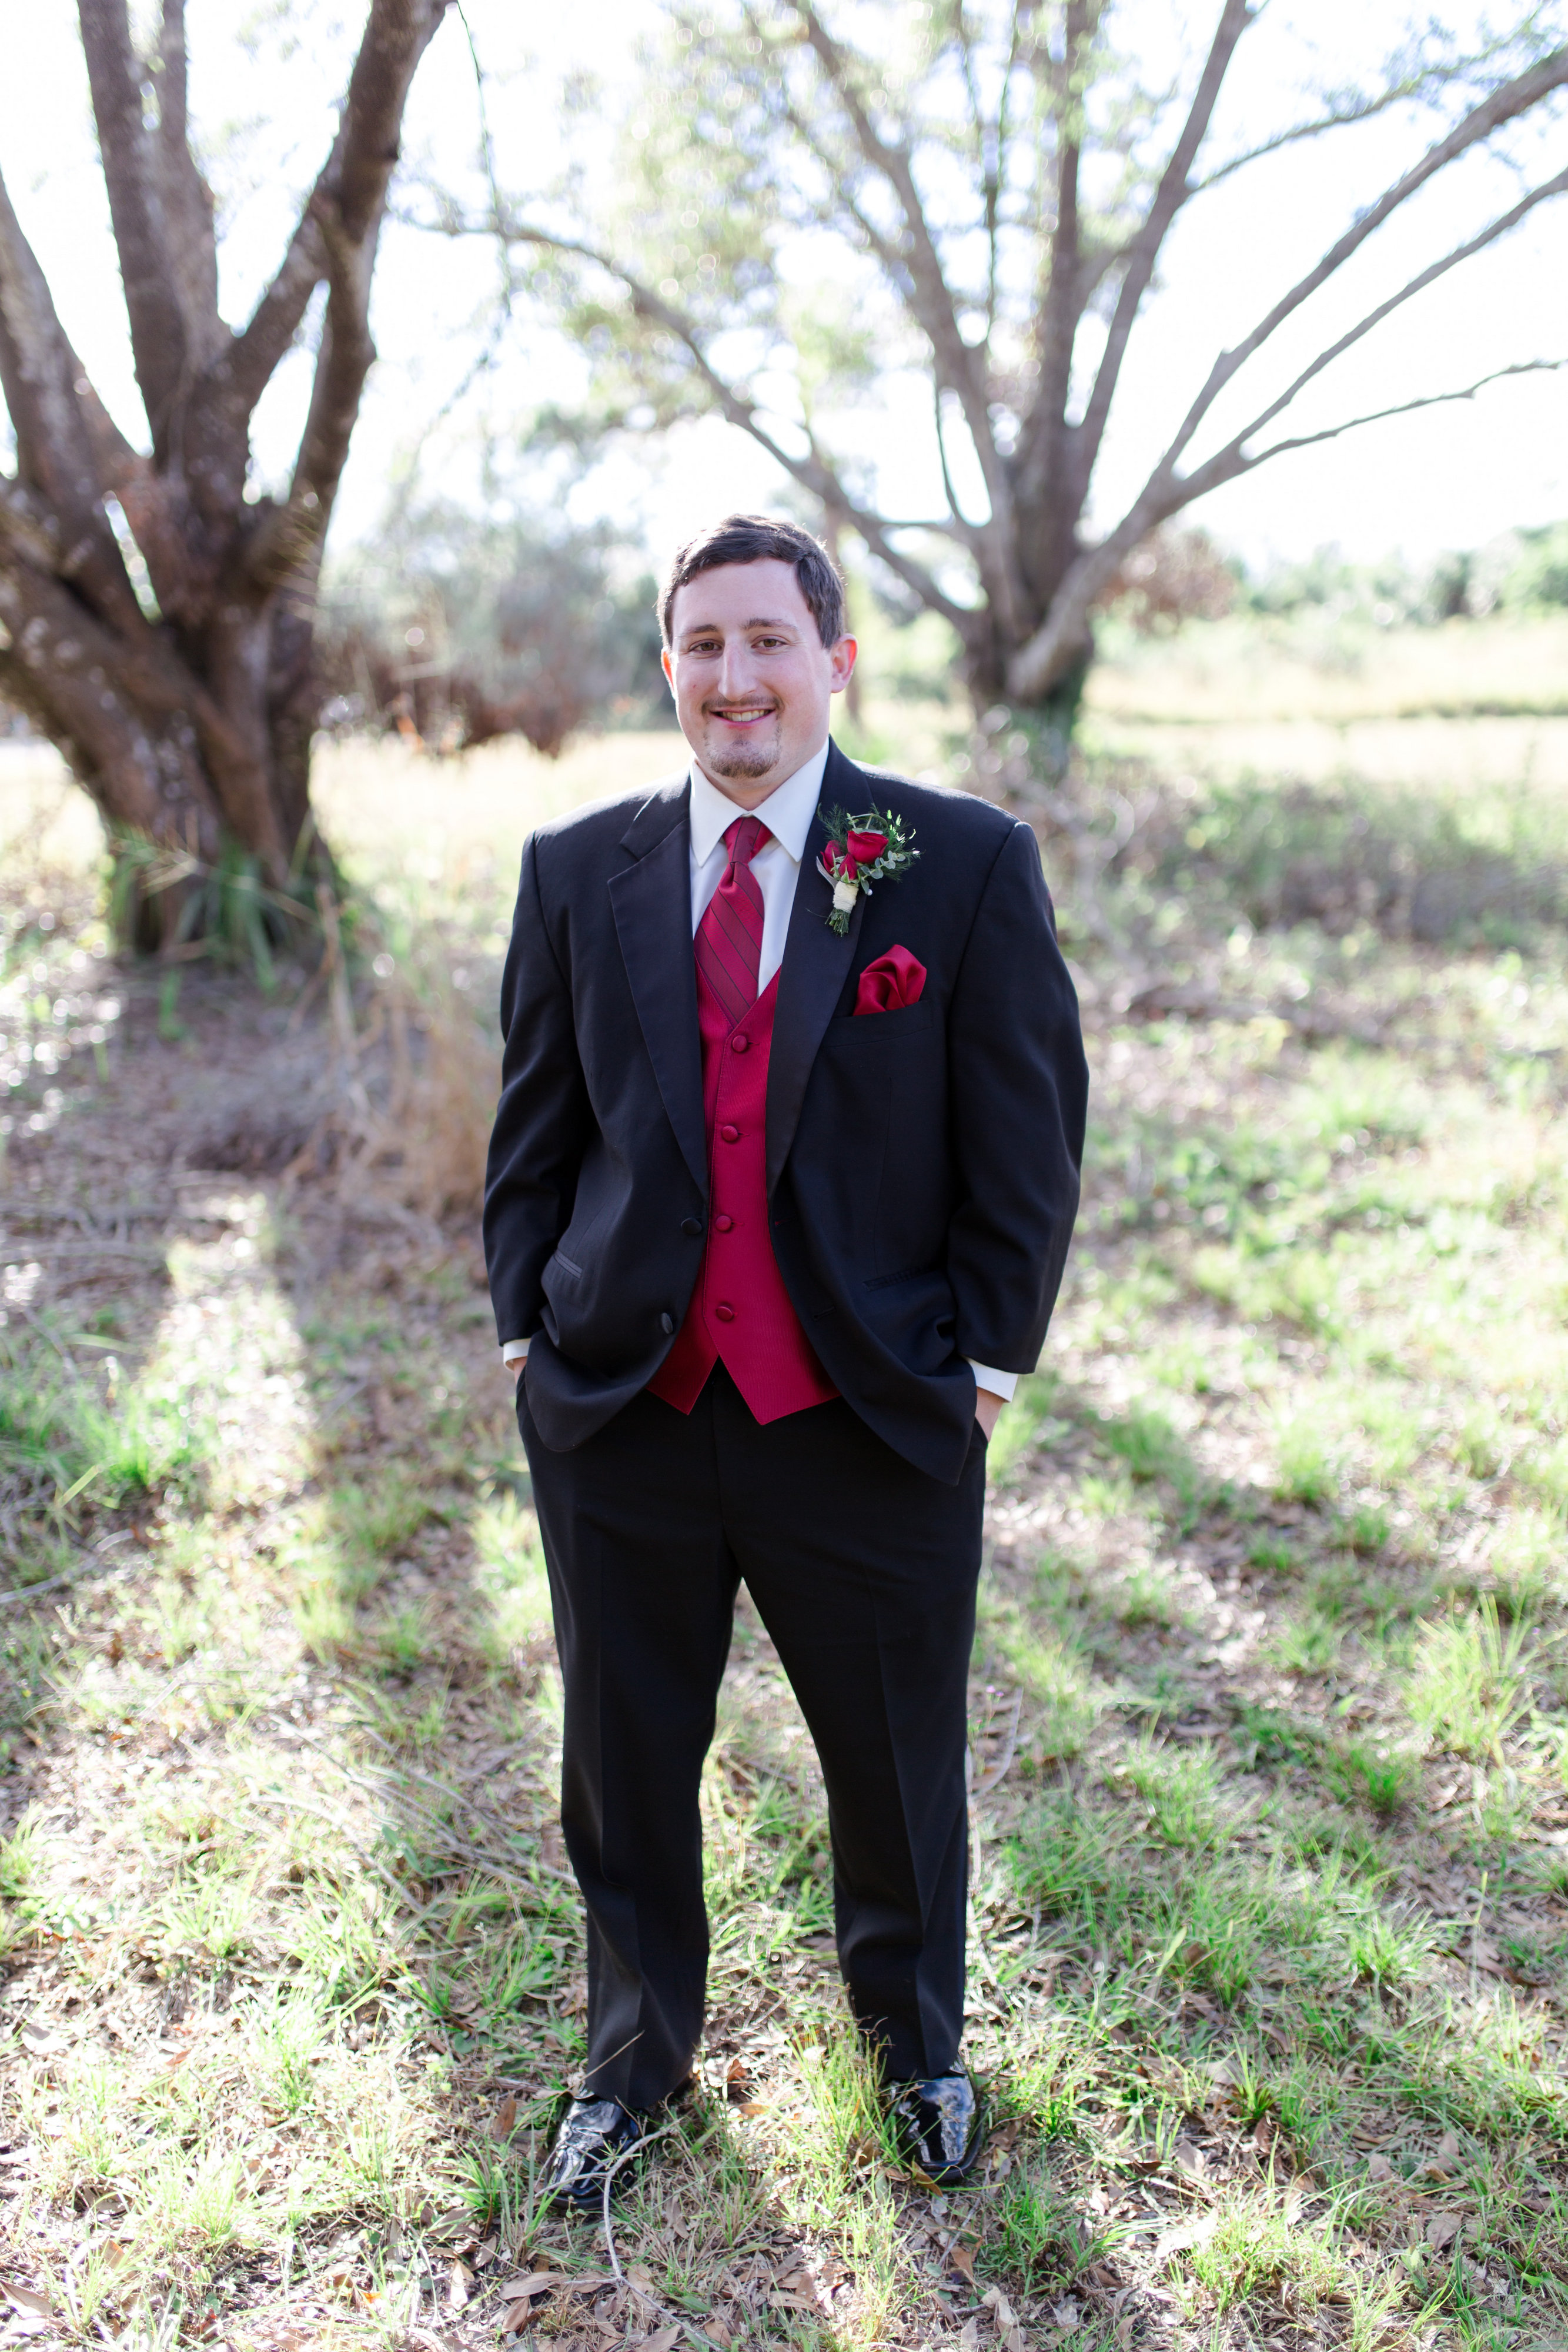 Red Rose, Boutonniere, Tuxedo, Red Vest, Hands in pockets, Groom poses, Groom, Groom photo ideas,  Wedding, Wedding Ring, Red, Married, Wedding Dress, Ft. Meyers, Florida